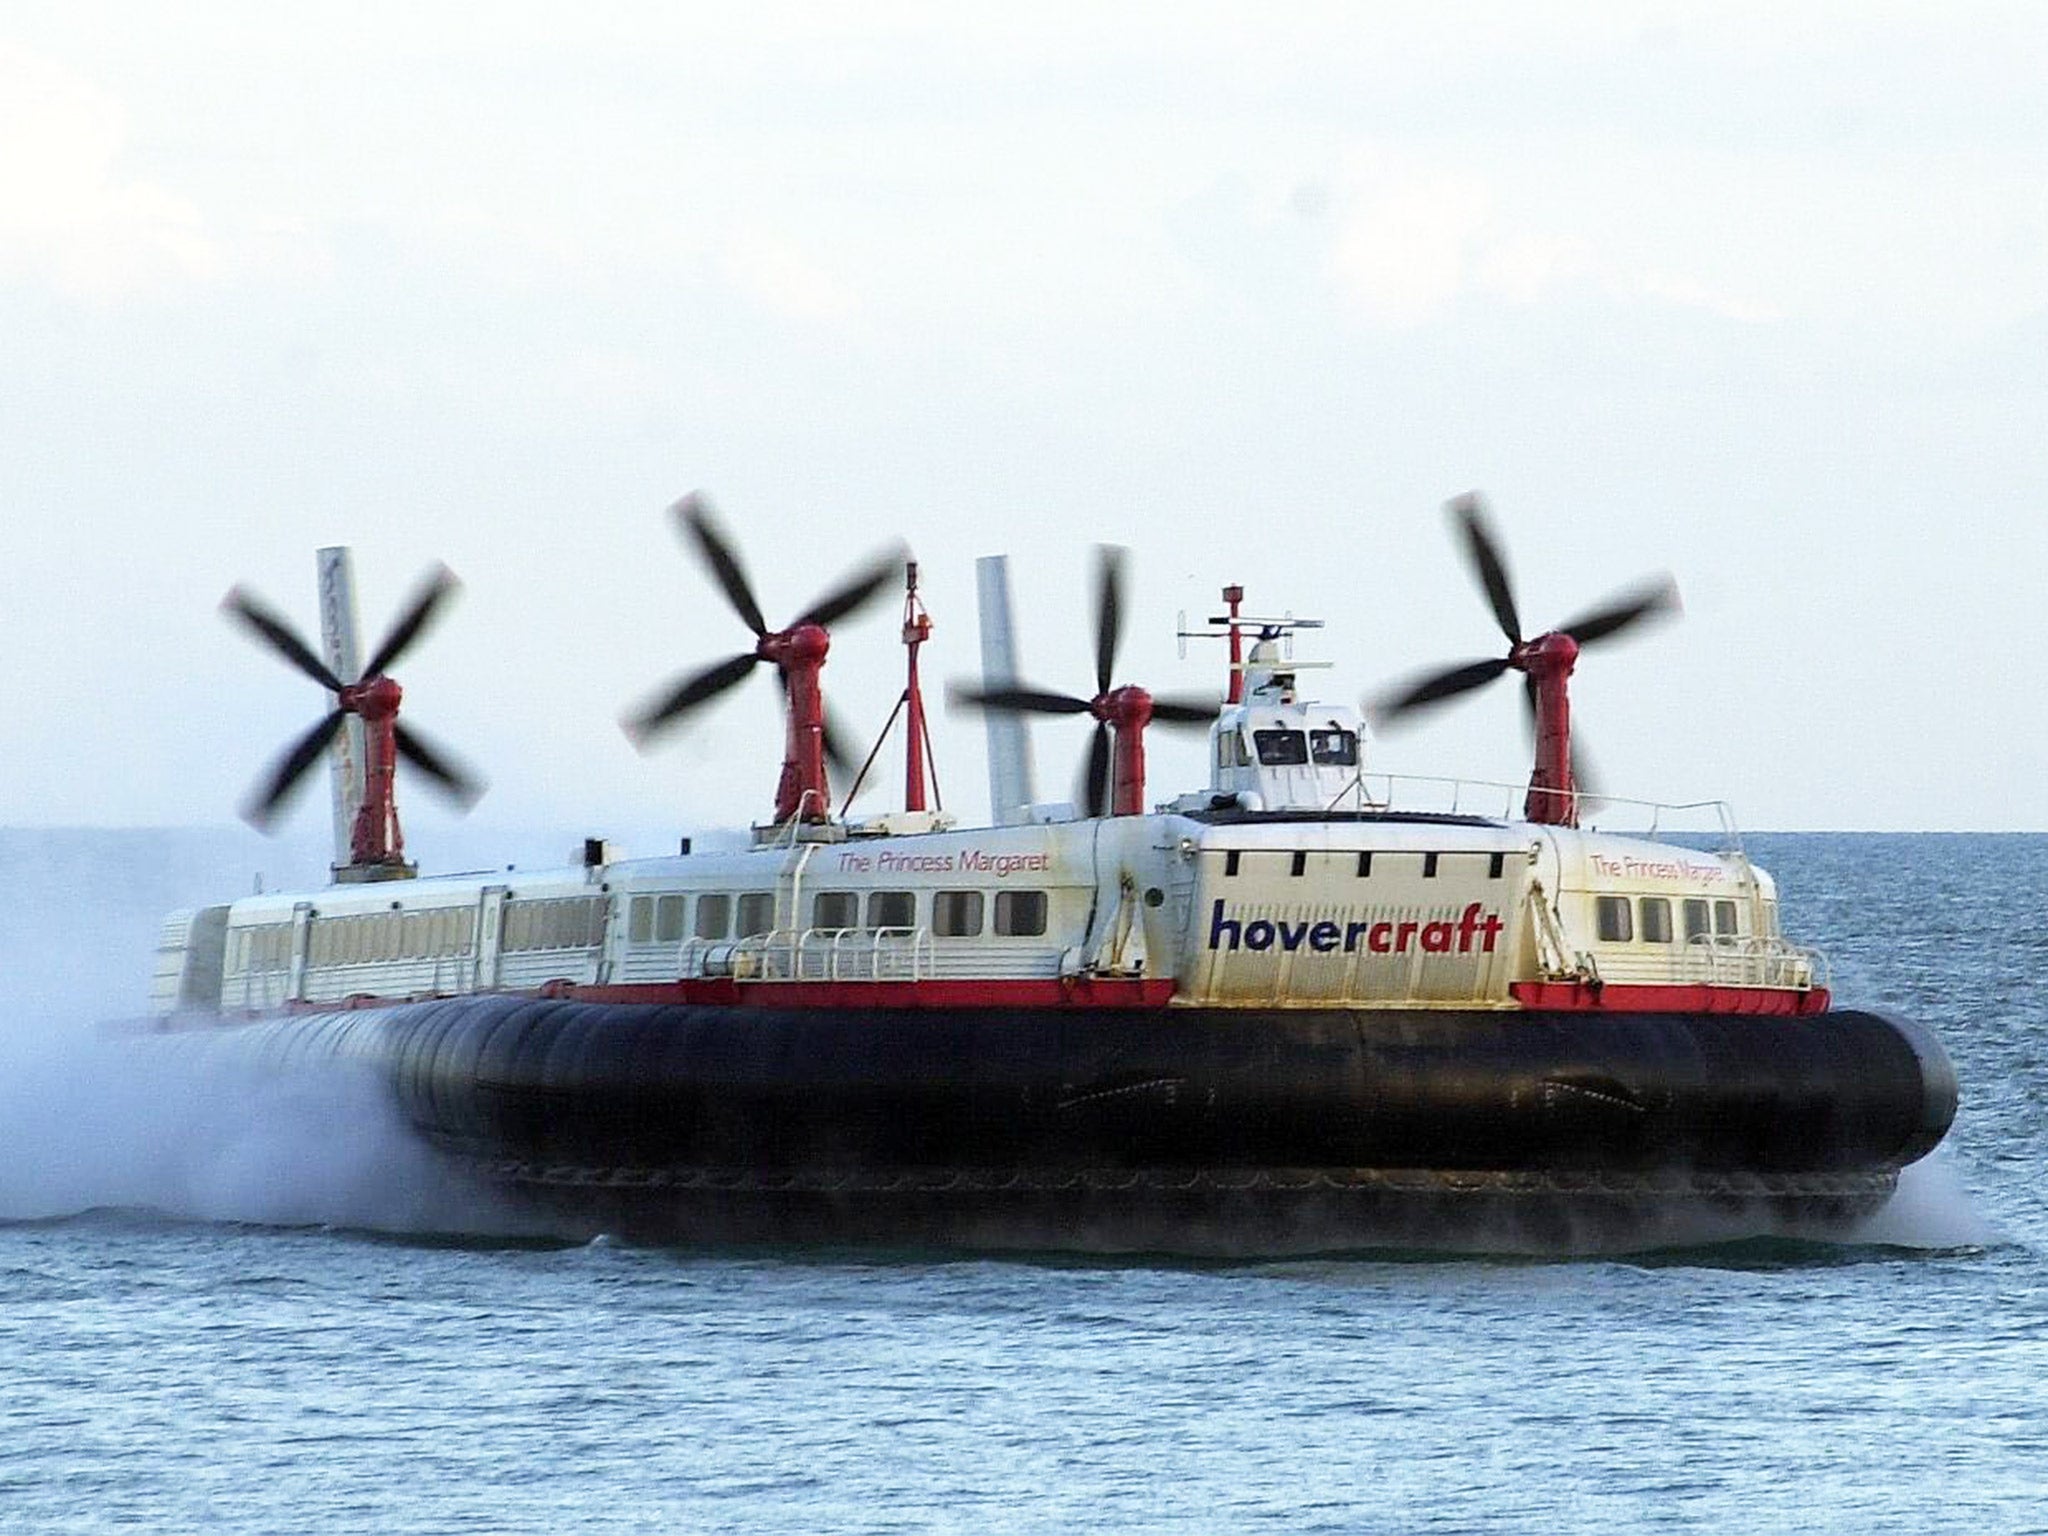 Hovercraft ‘Princess Margaret’ turning round for her last ever trip to Calais in 2000